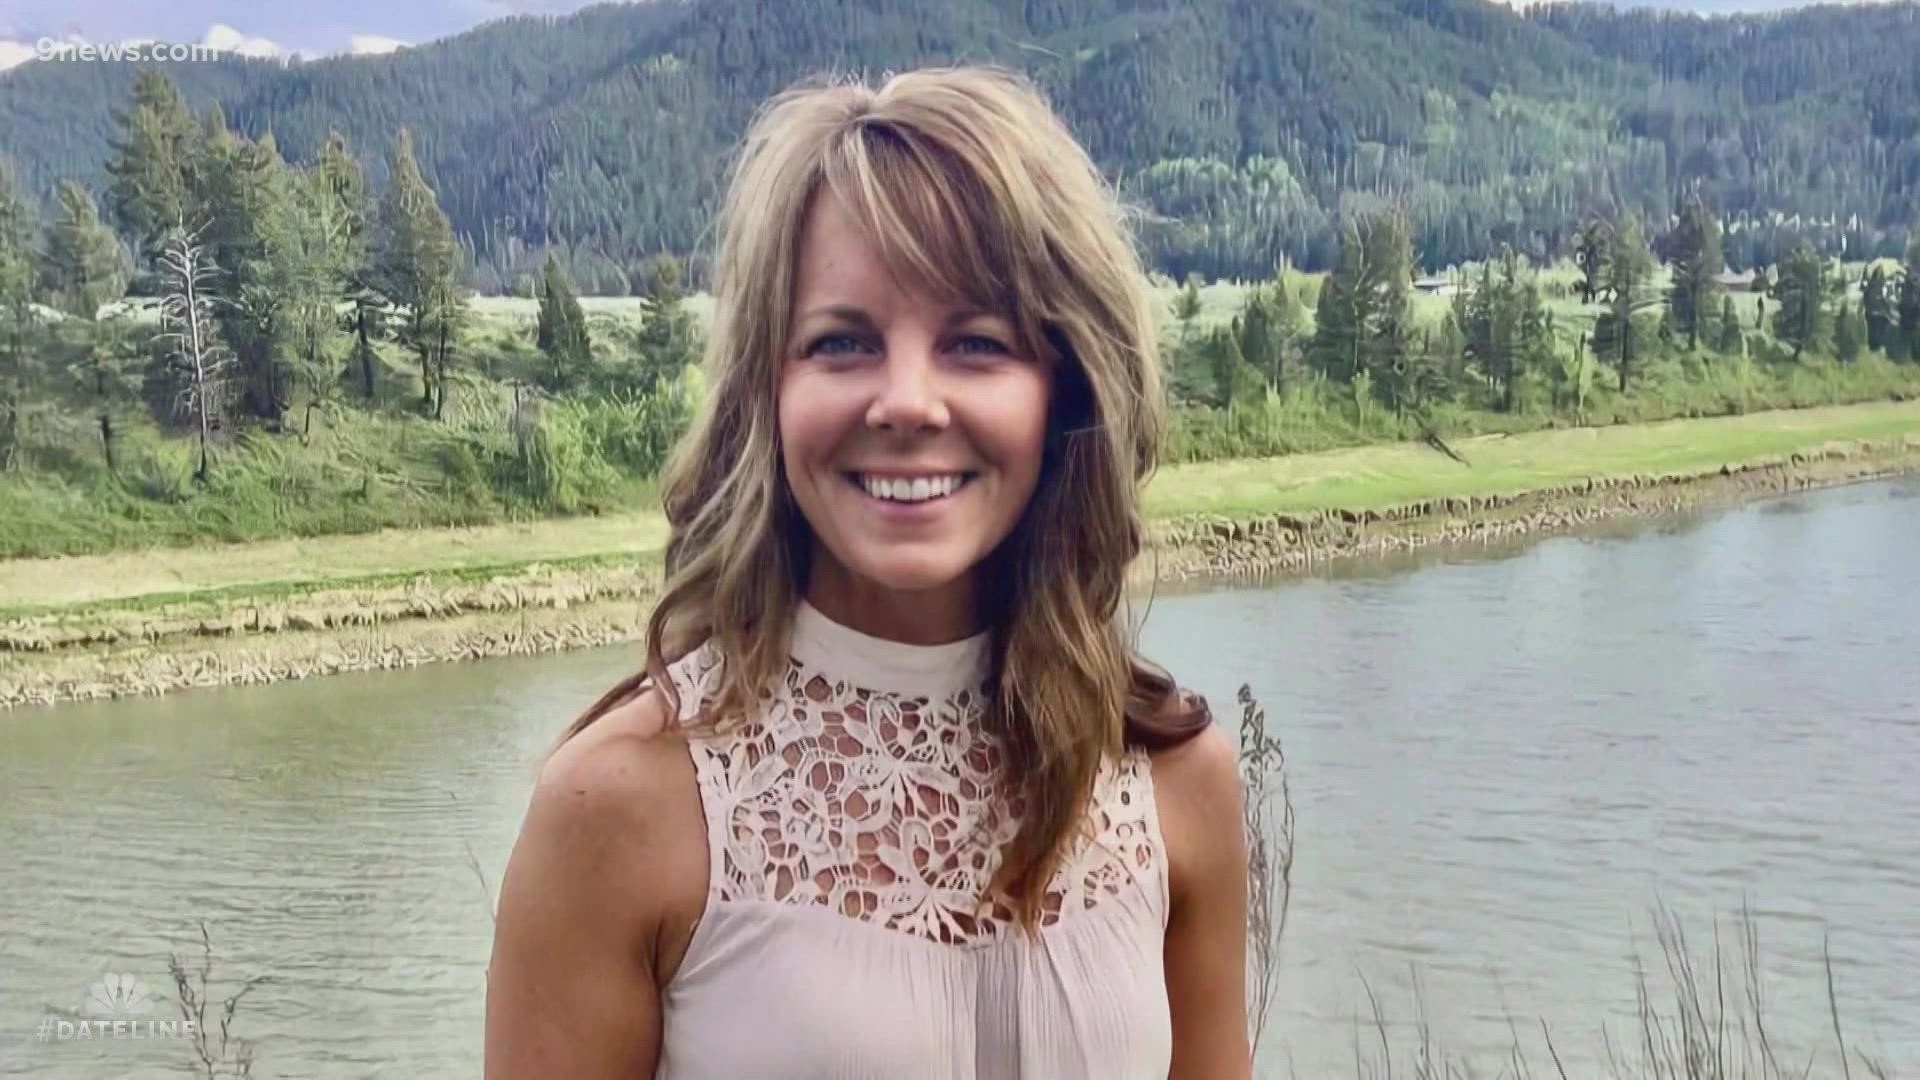 The autopsy report said sedatives and tranquilizers were found in Suzanne's bones. Lawyers for Barry Morphew told 9NEWS that caffeine was also found in her body.